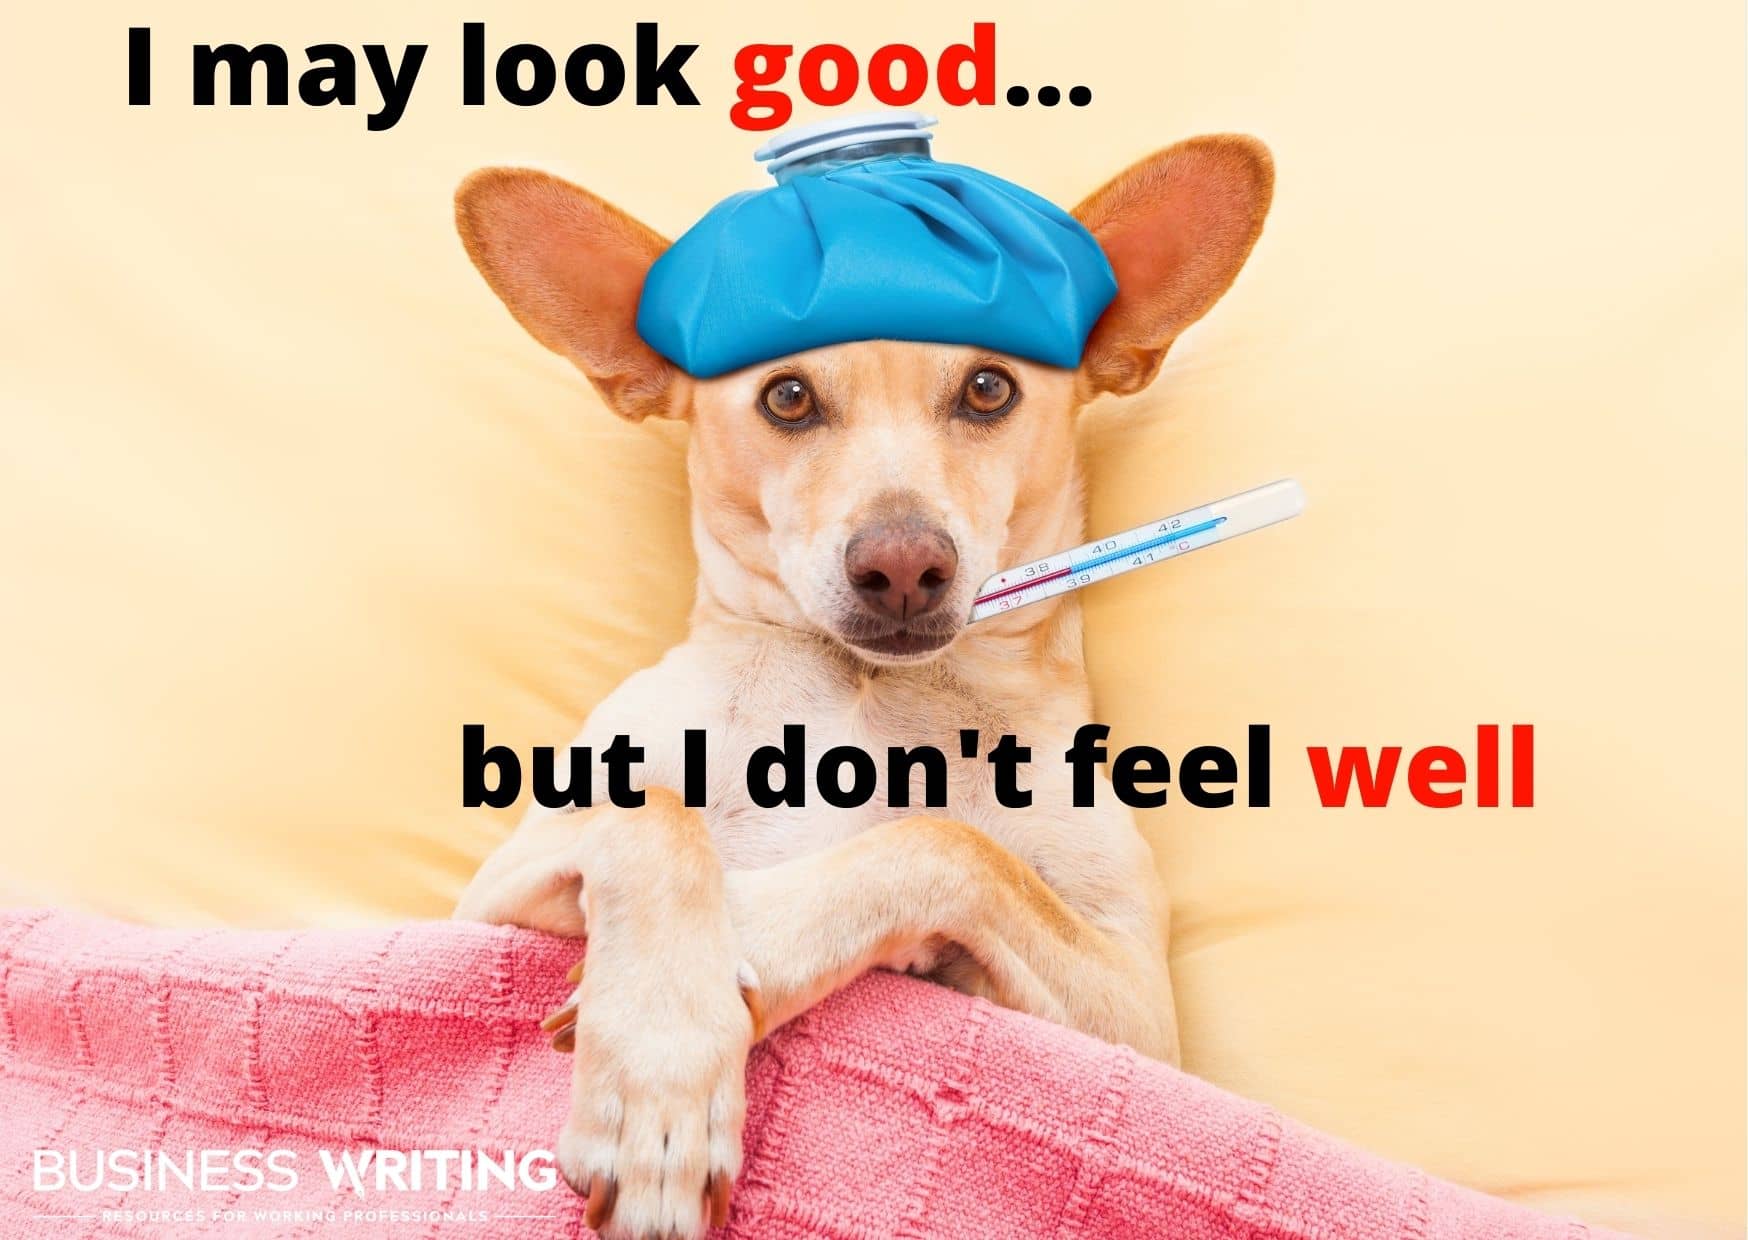 Graphic explaining the difference between good vs. well: I may look good, but I don't feel well (picture of a sick puppy)